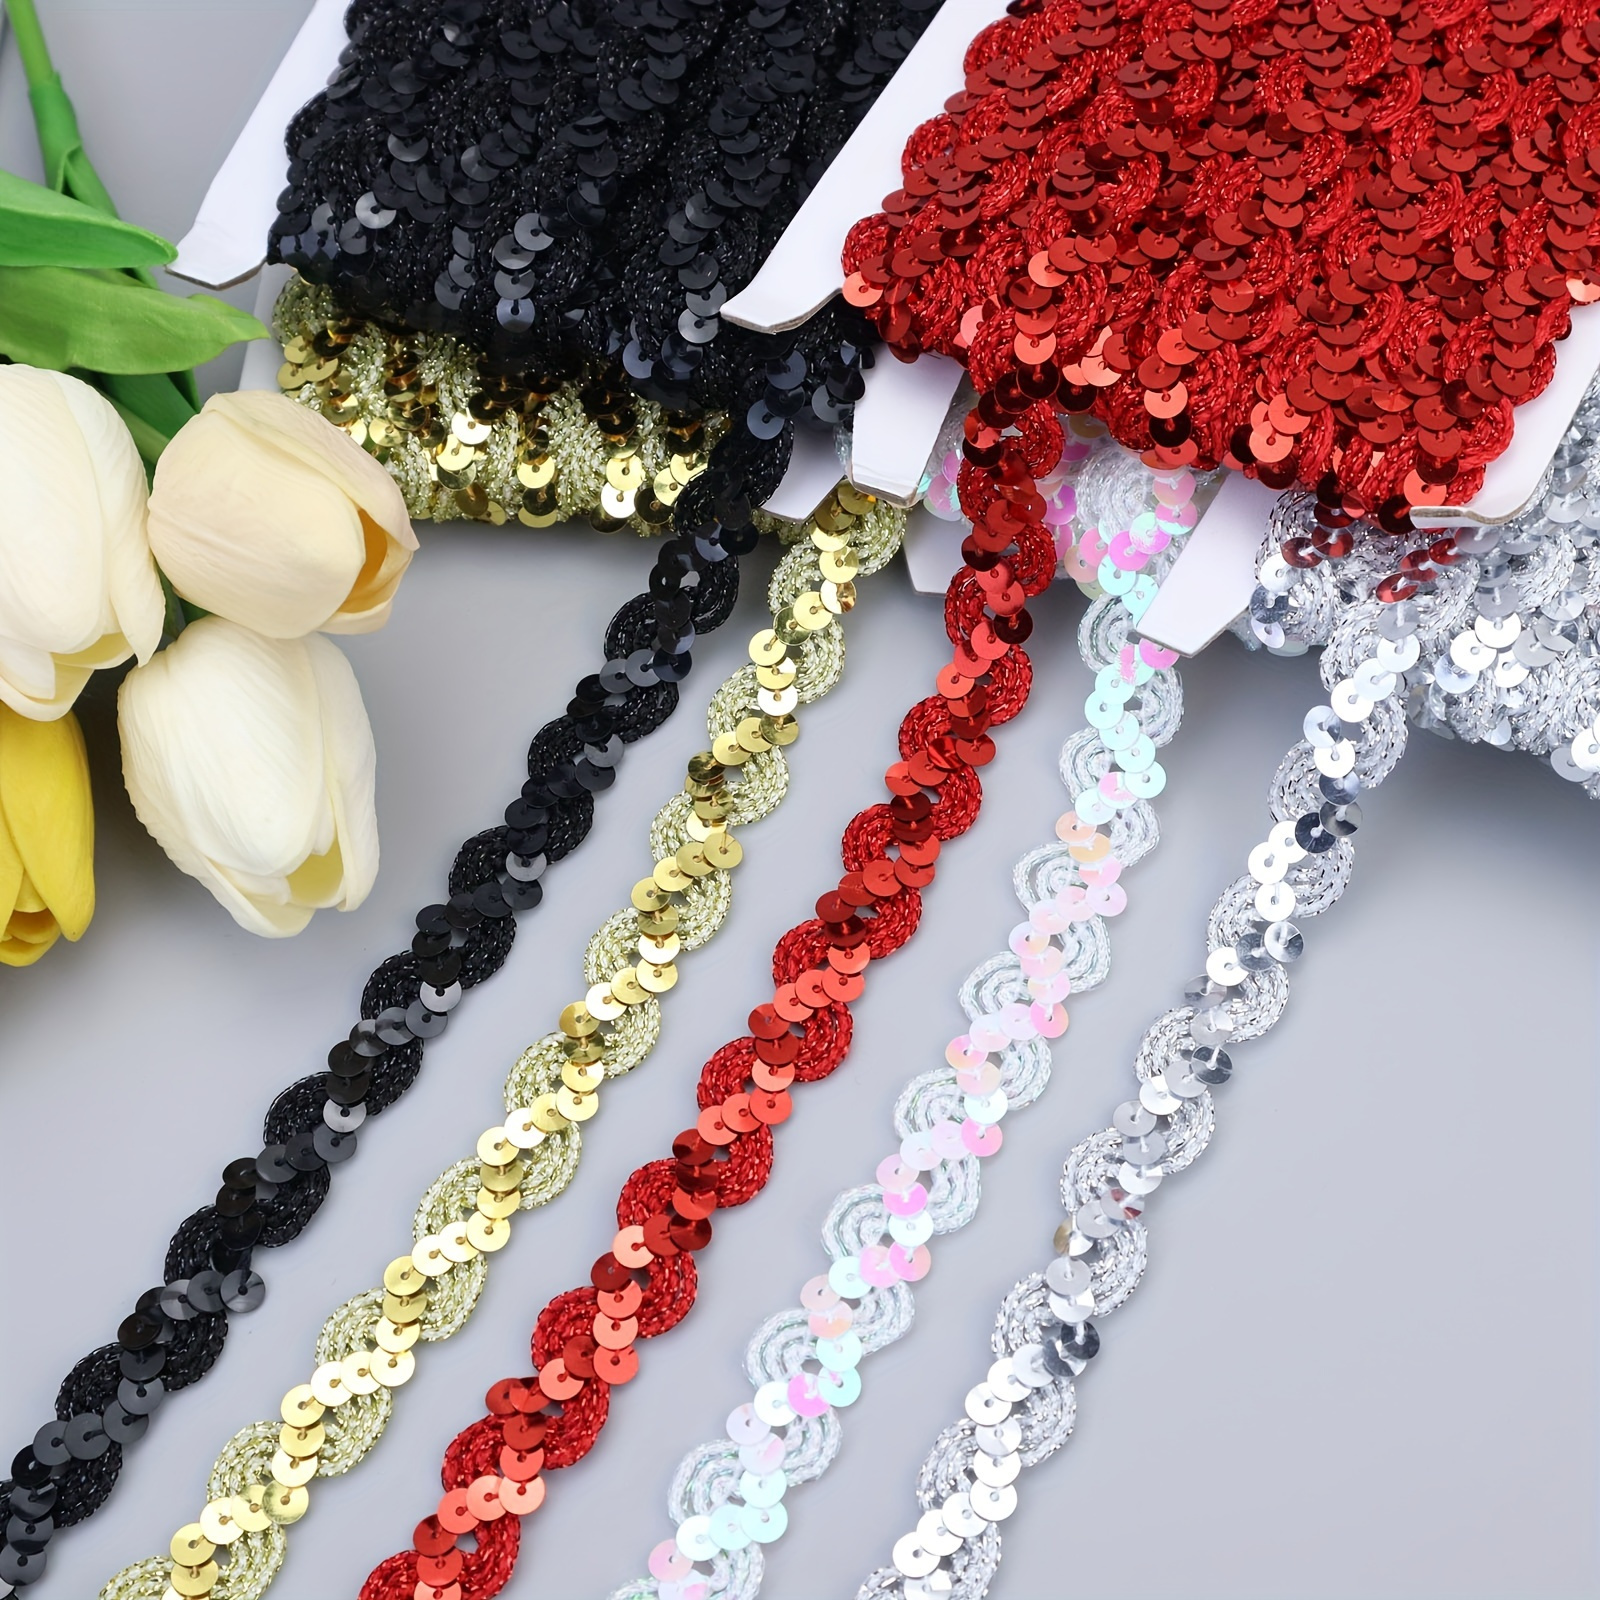 

2 Yards Sequined Glittering Trim Ribbon, Rope, Scalloped Edge Braid Trim For Sewing Diy Craft Dress Hat Bag Decoration